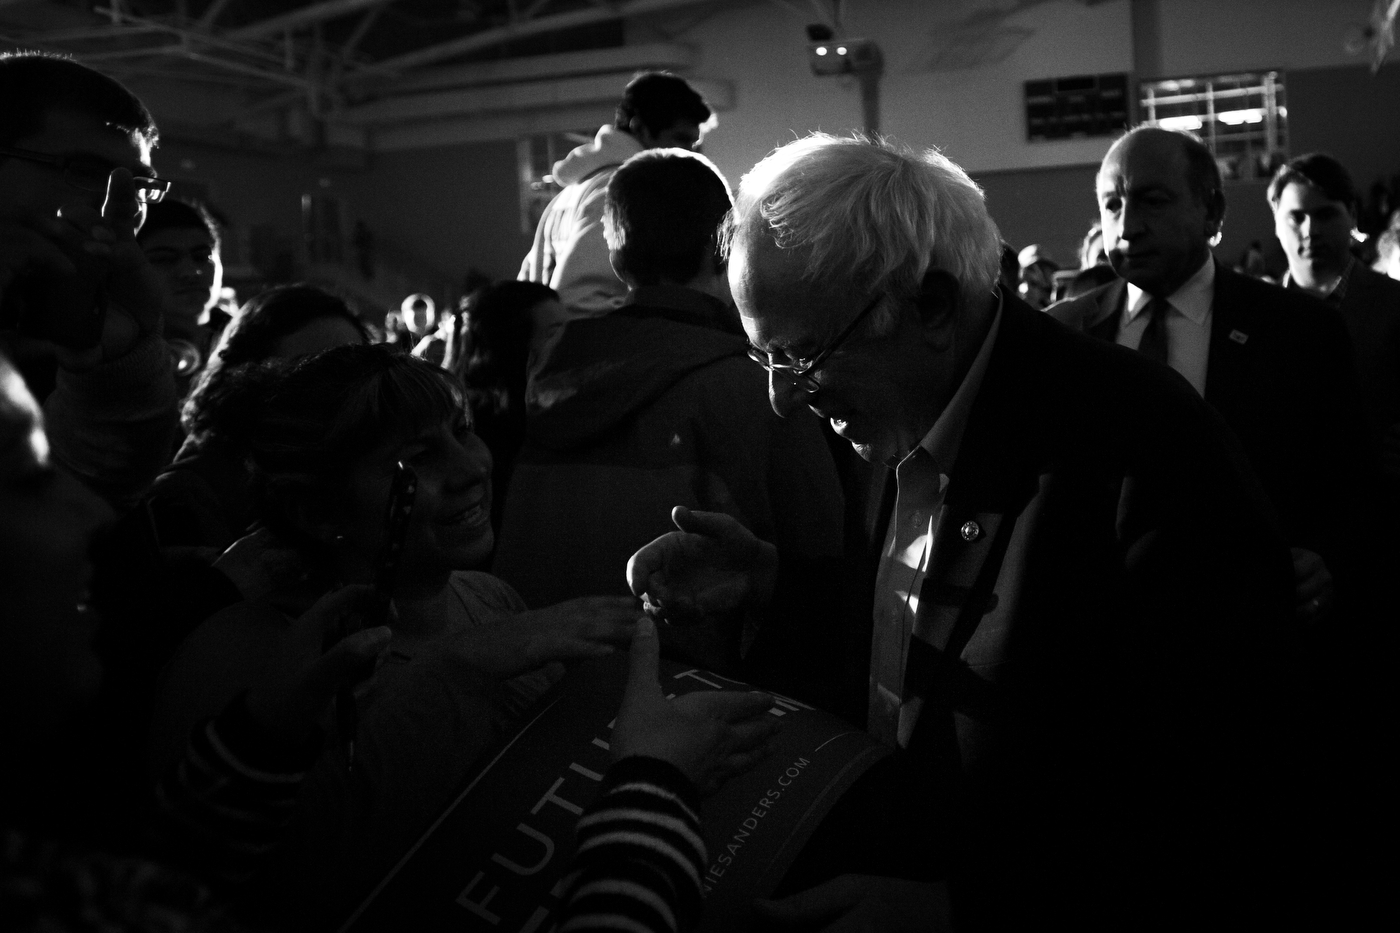  U.S. Democratic presidential candidate Bernie Sanders greets supporters after speaking during a campaign event at Grinnell College in Grinnell, Iowa on January 25. 